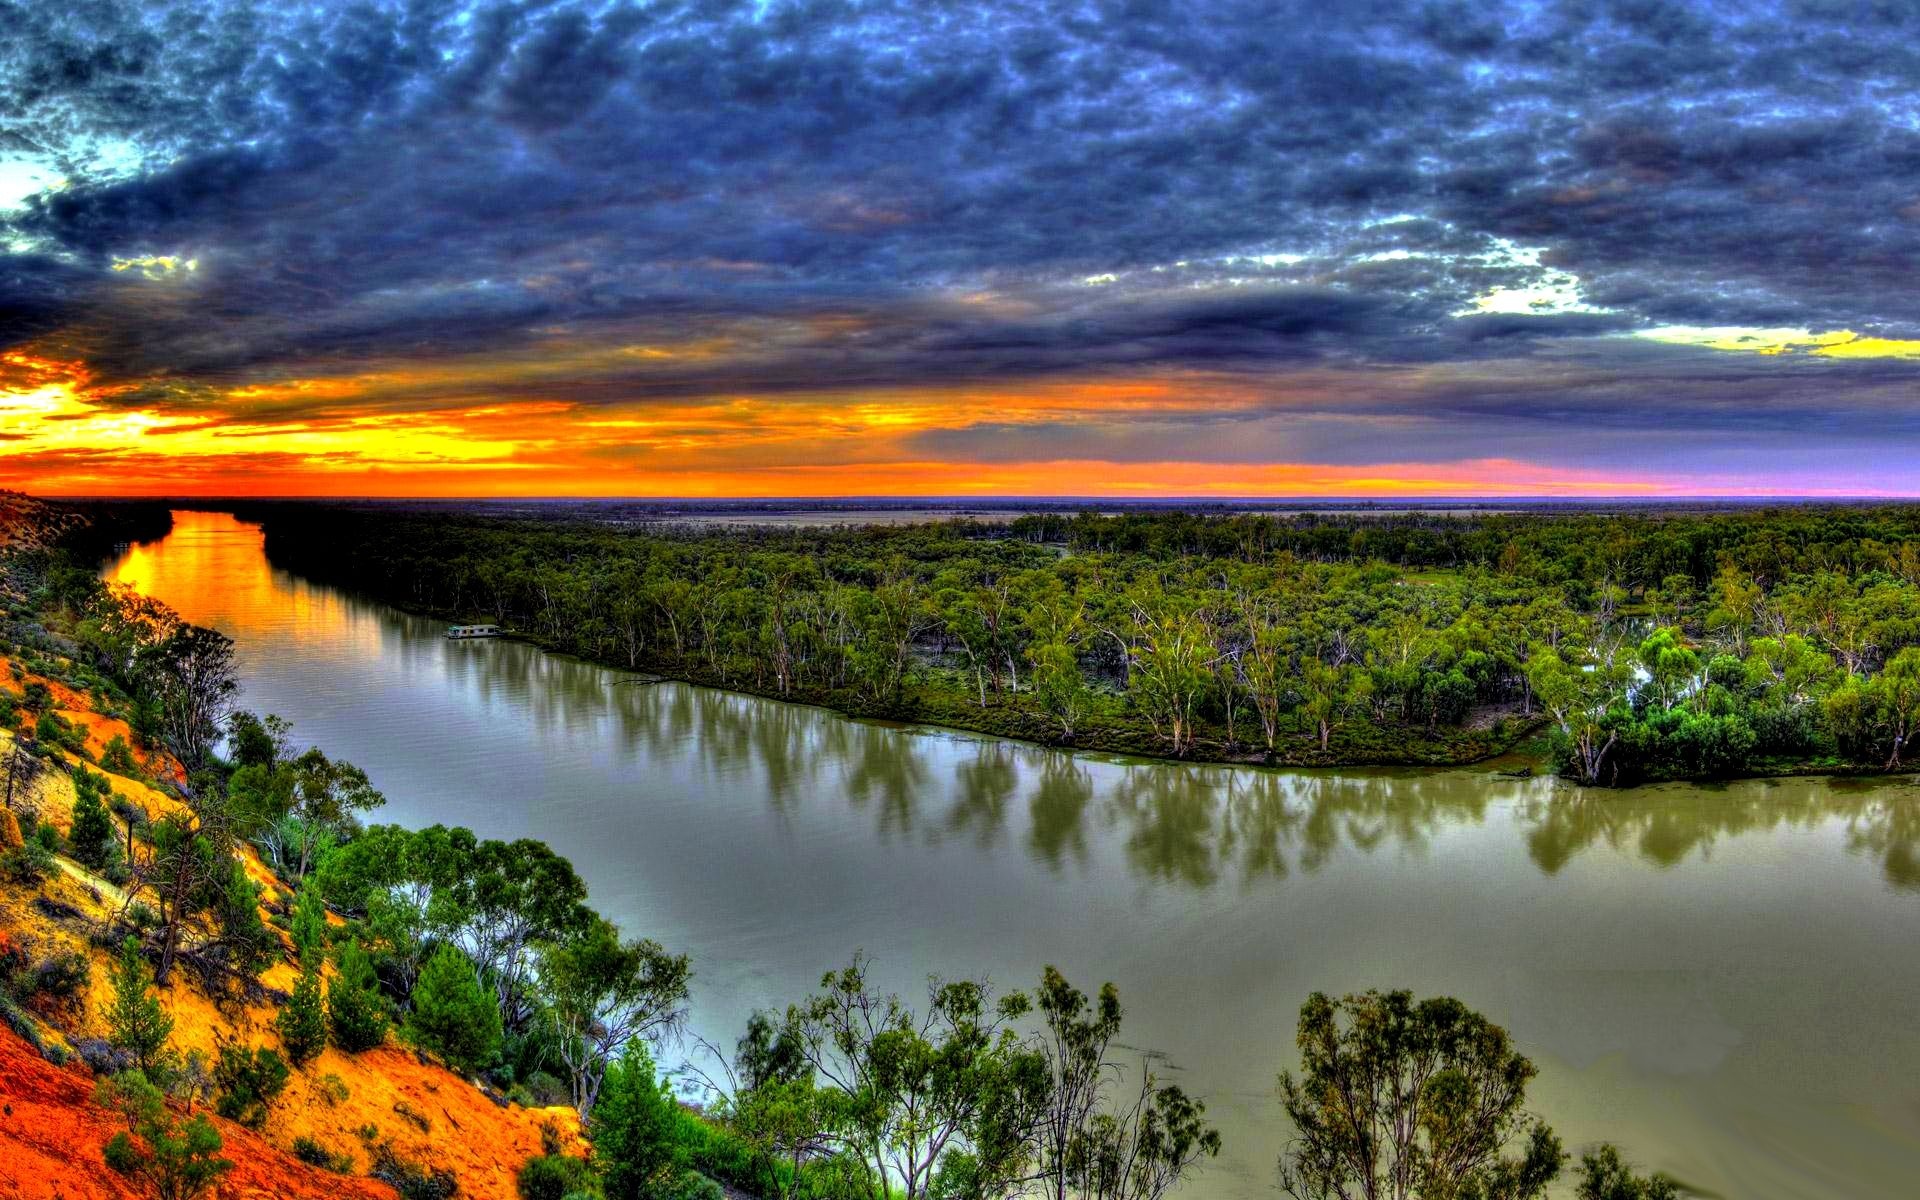 The Murray River, Tranquil waterway scenes, Nature's serenity, Peaceful images, 1920x1200 HD Desktop